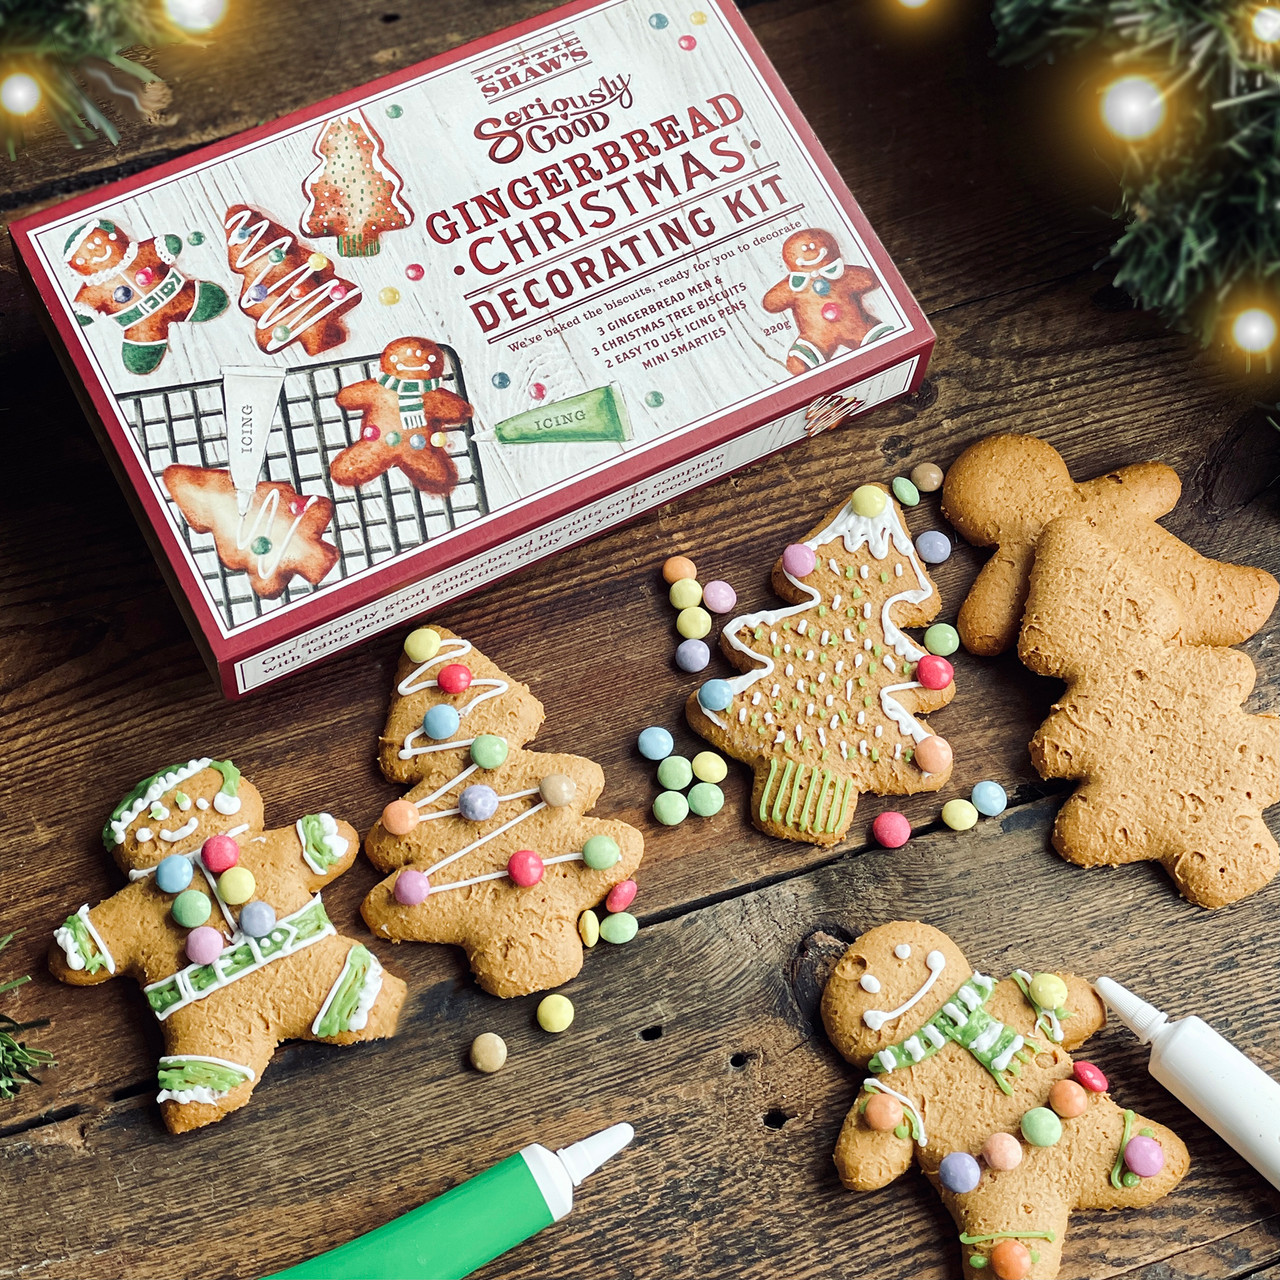 GINGERBREAD CHRISTMAS DECORATING KIT|LOTTIE SHAW\'S